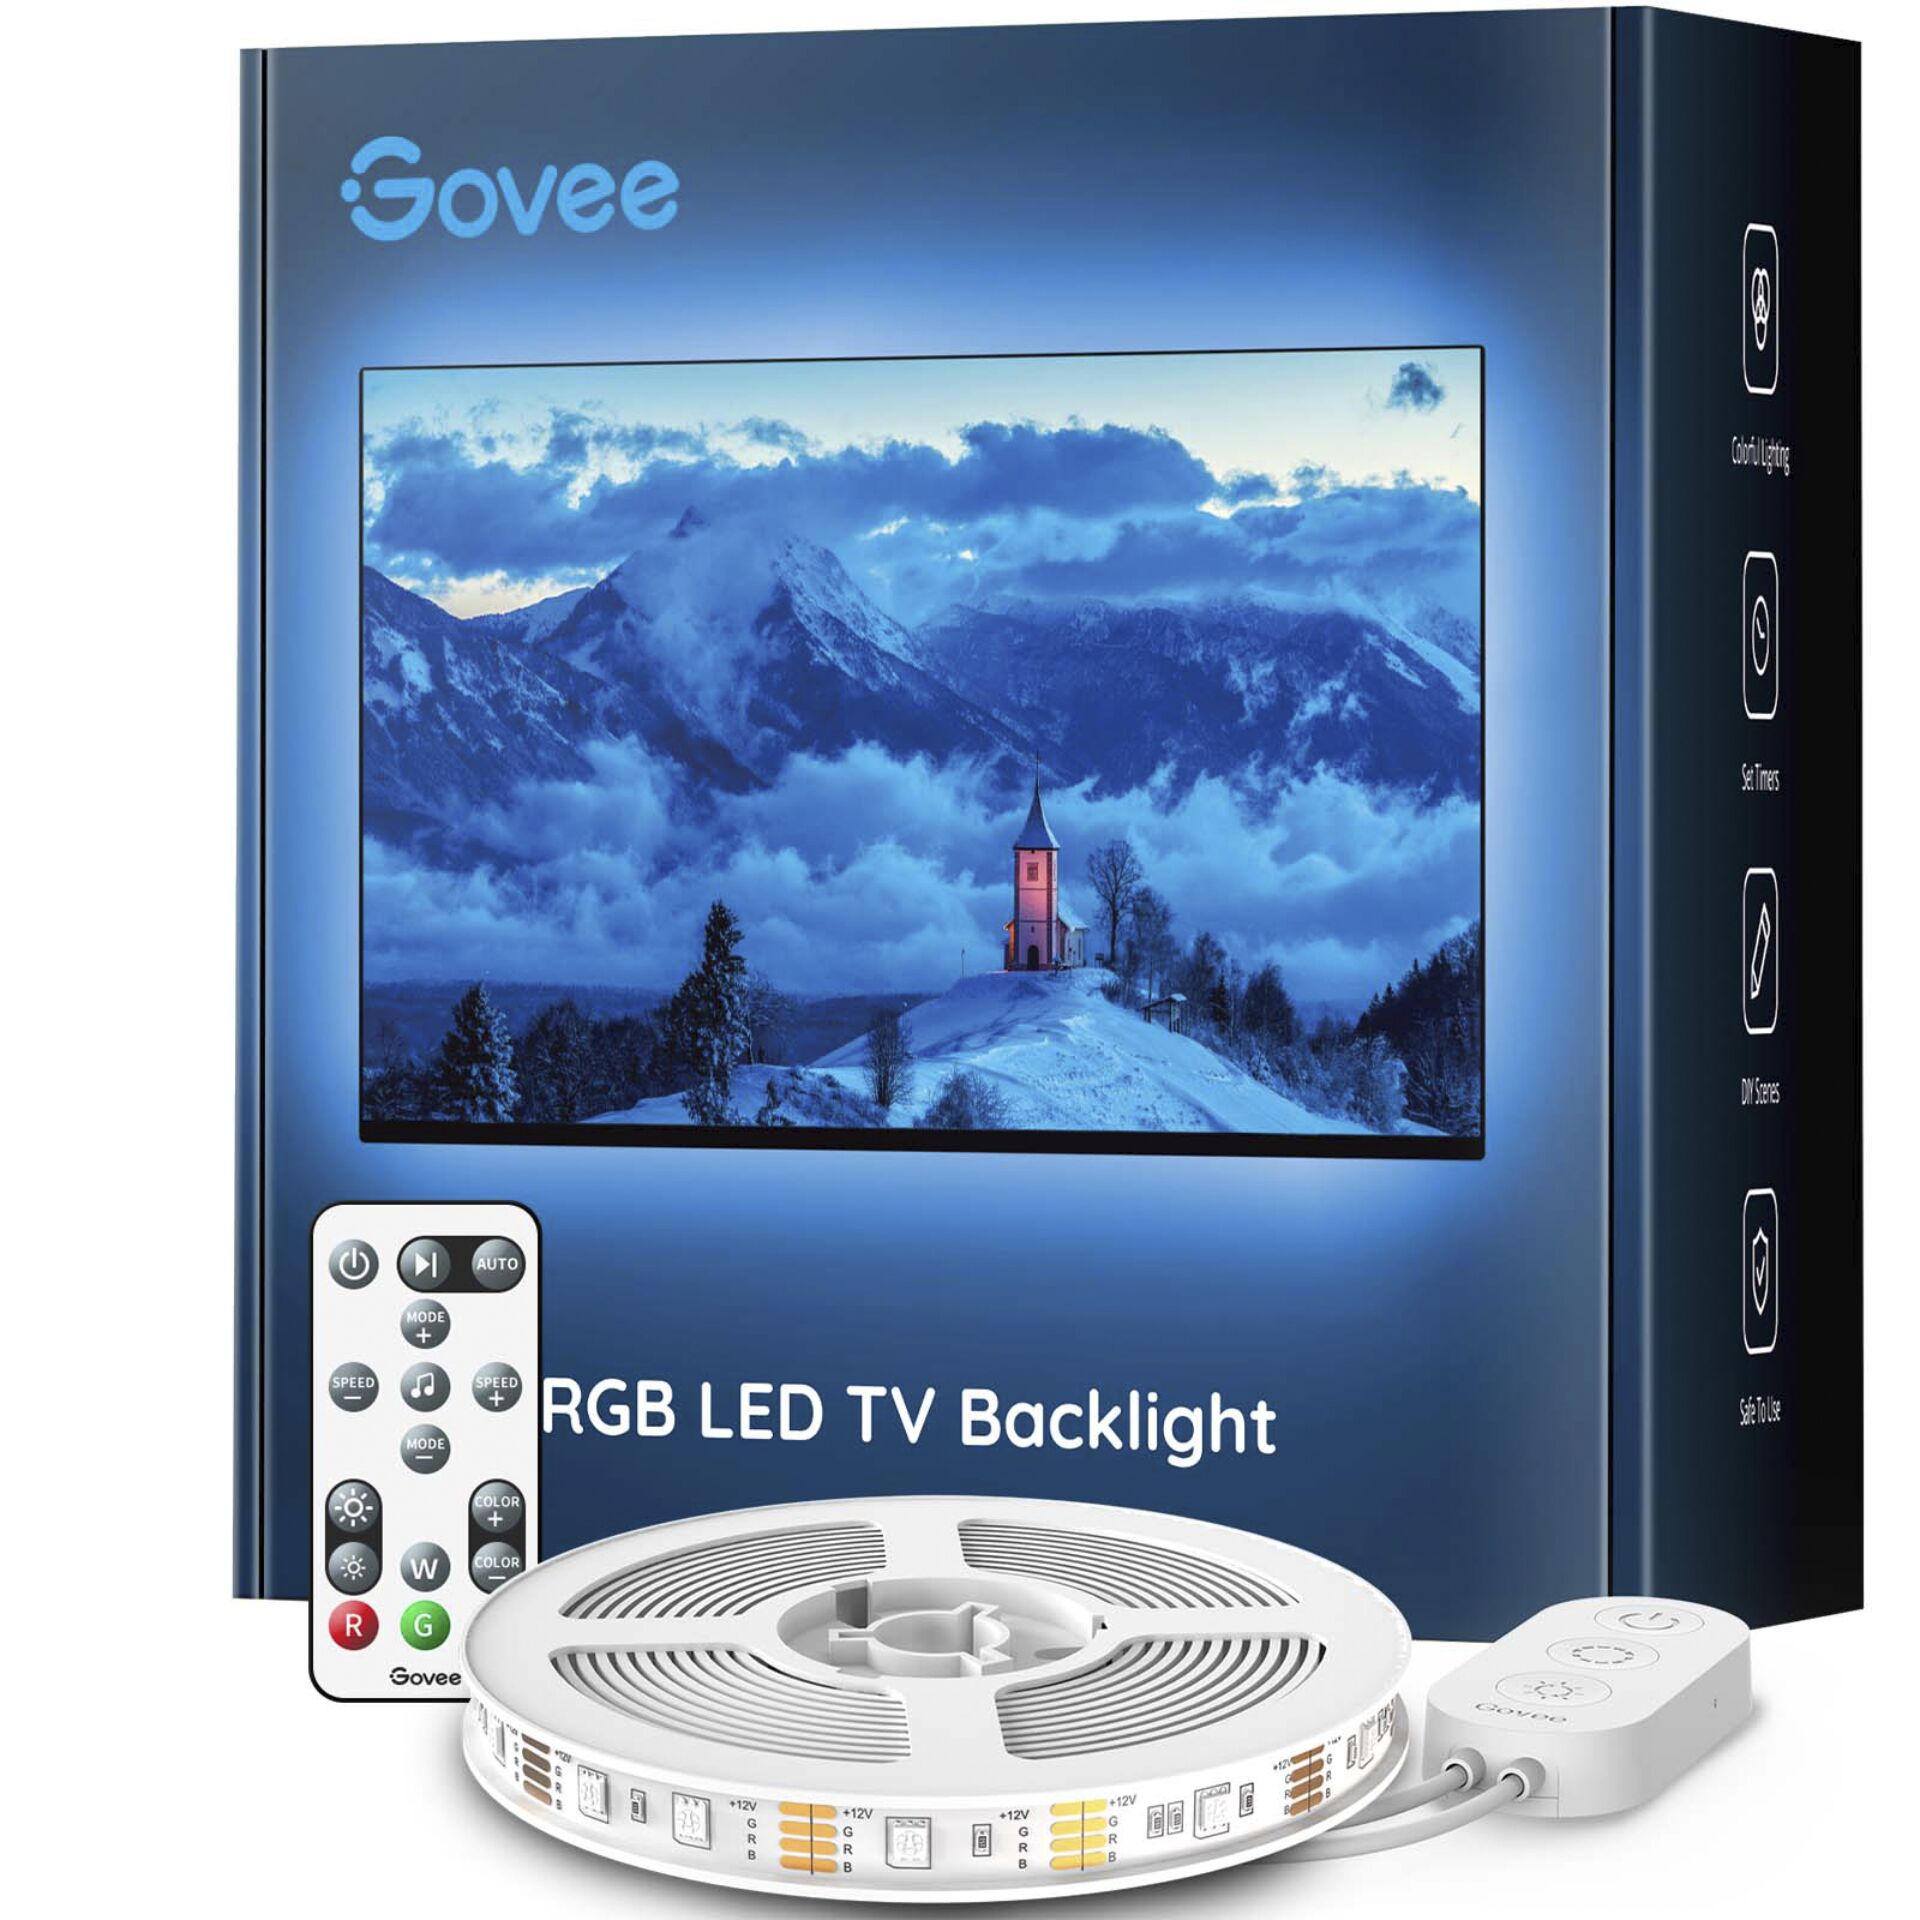 Govee RGB Bluetooth LED Back- light for 46 Inch - 60 Inch TV